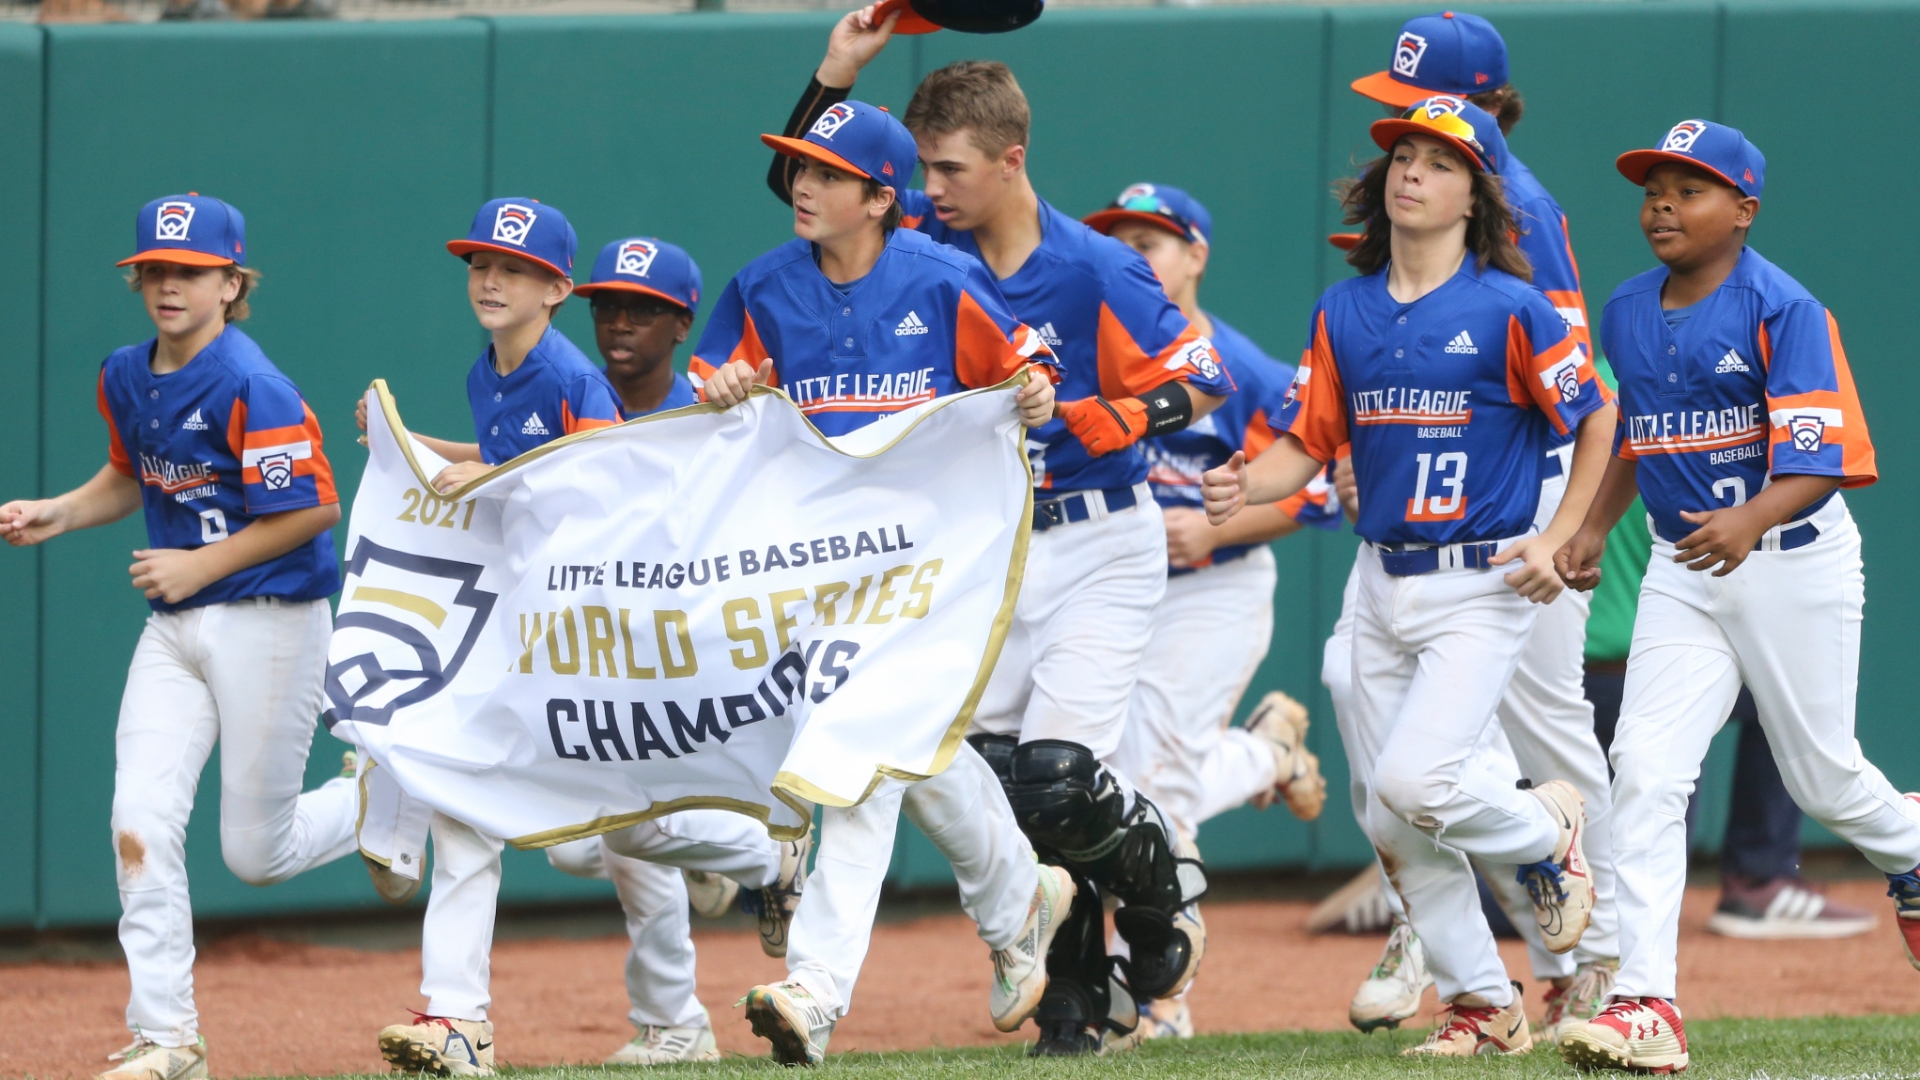 The top moments from the final day at the LLWS Stream the Video